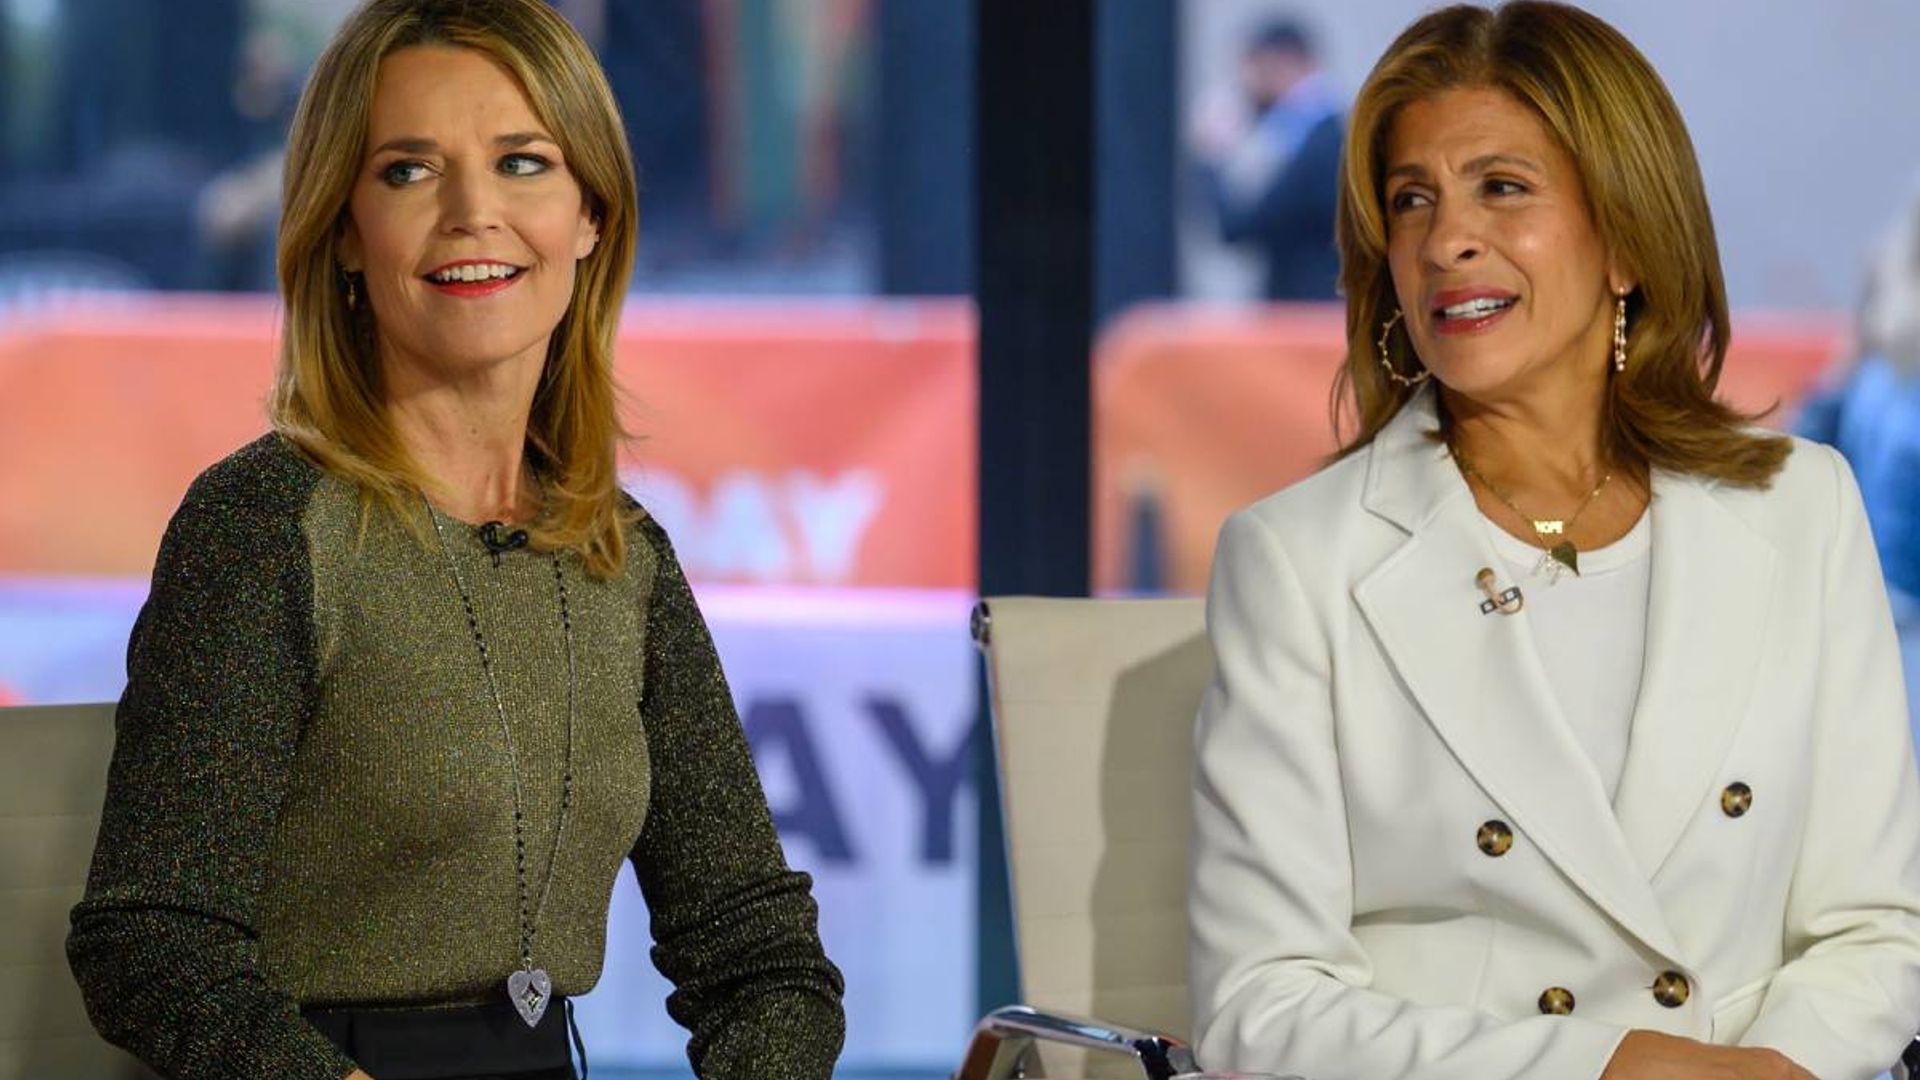 Savannah Guthrie wows with stylish outfit as she reunites with Hoda Kotb on Today